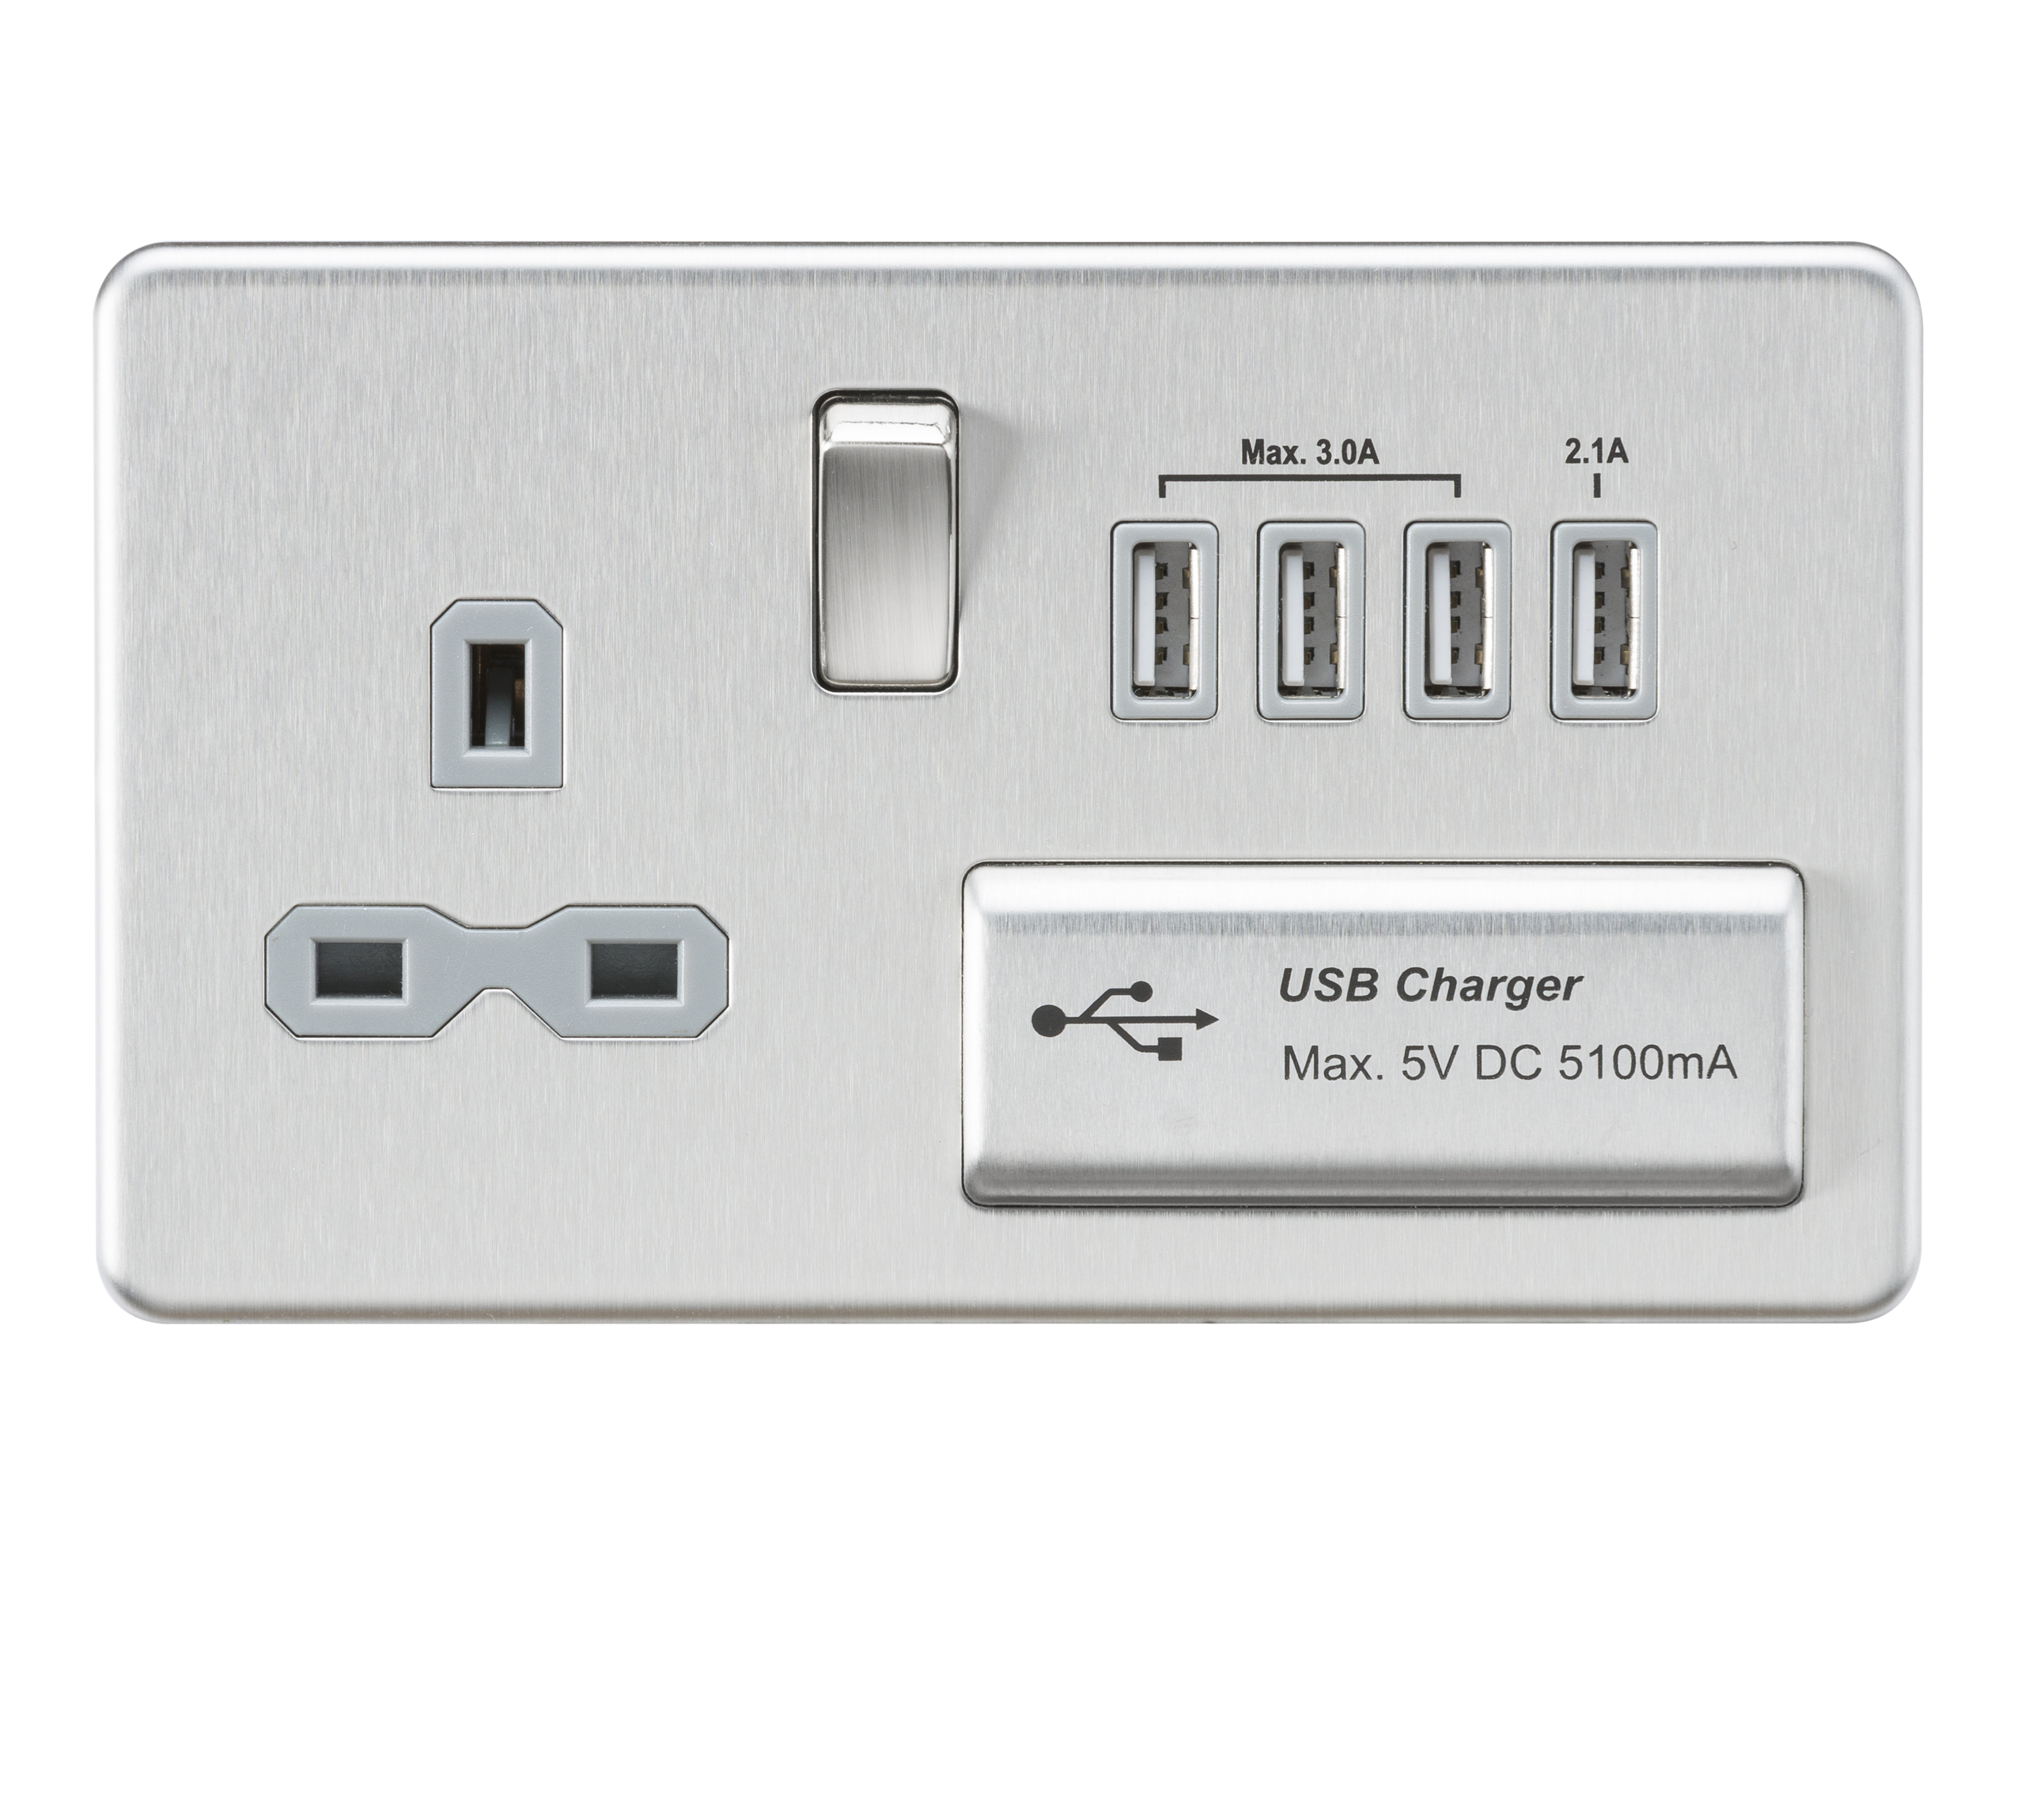 Screwless 13A Switched Socket With Quad USB Charger (5.1A) - Brushed Chrome With Grey Insert - SFR7USB4BCG 